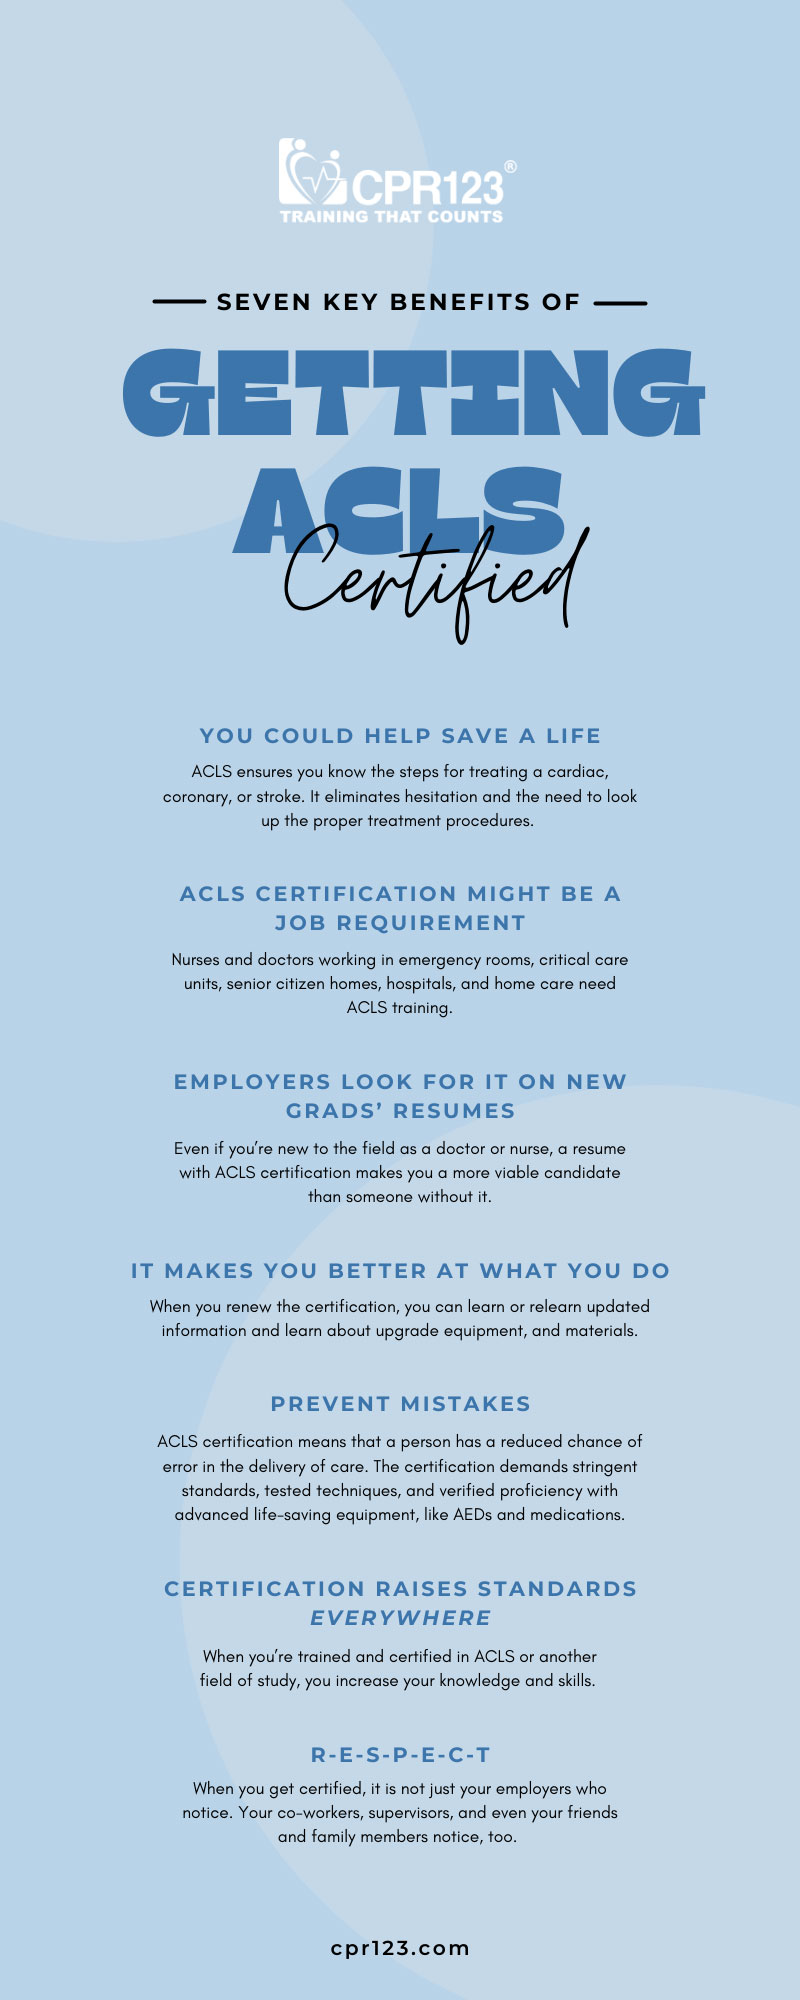 7 Key Benefits of Getting ACLS Certified